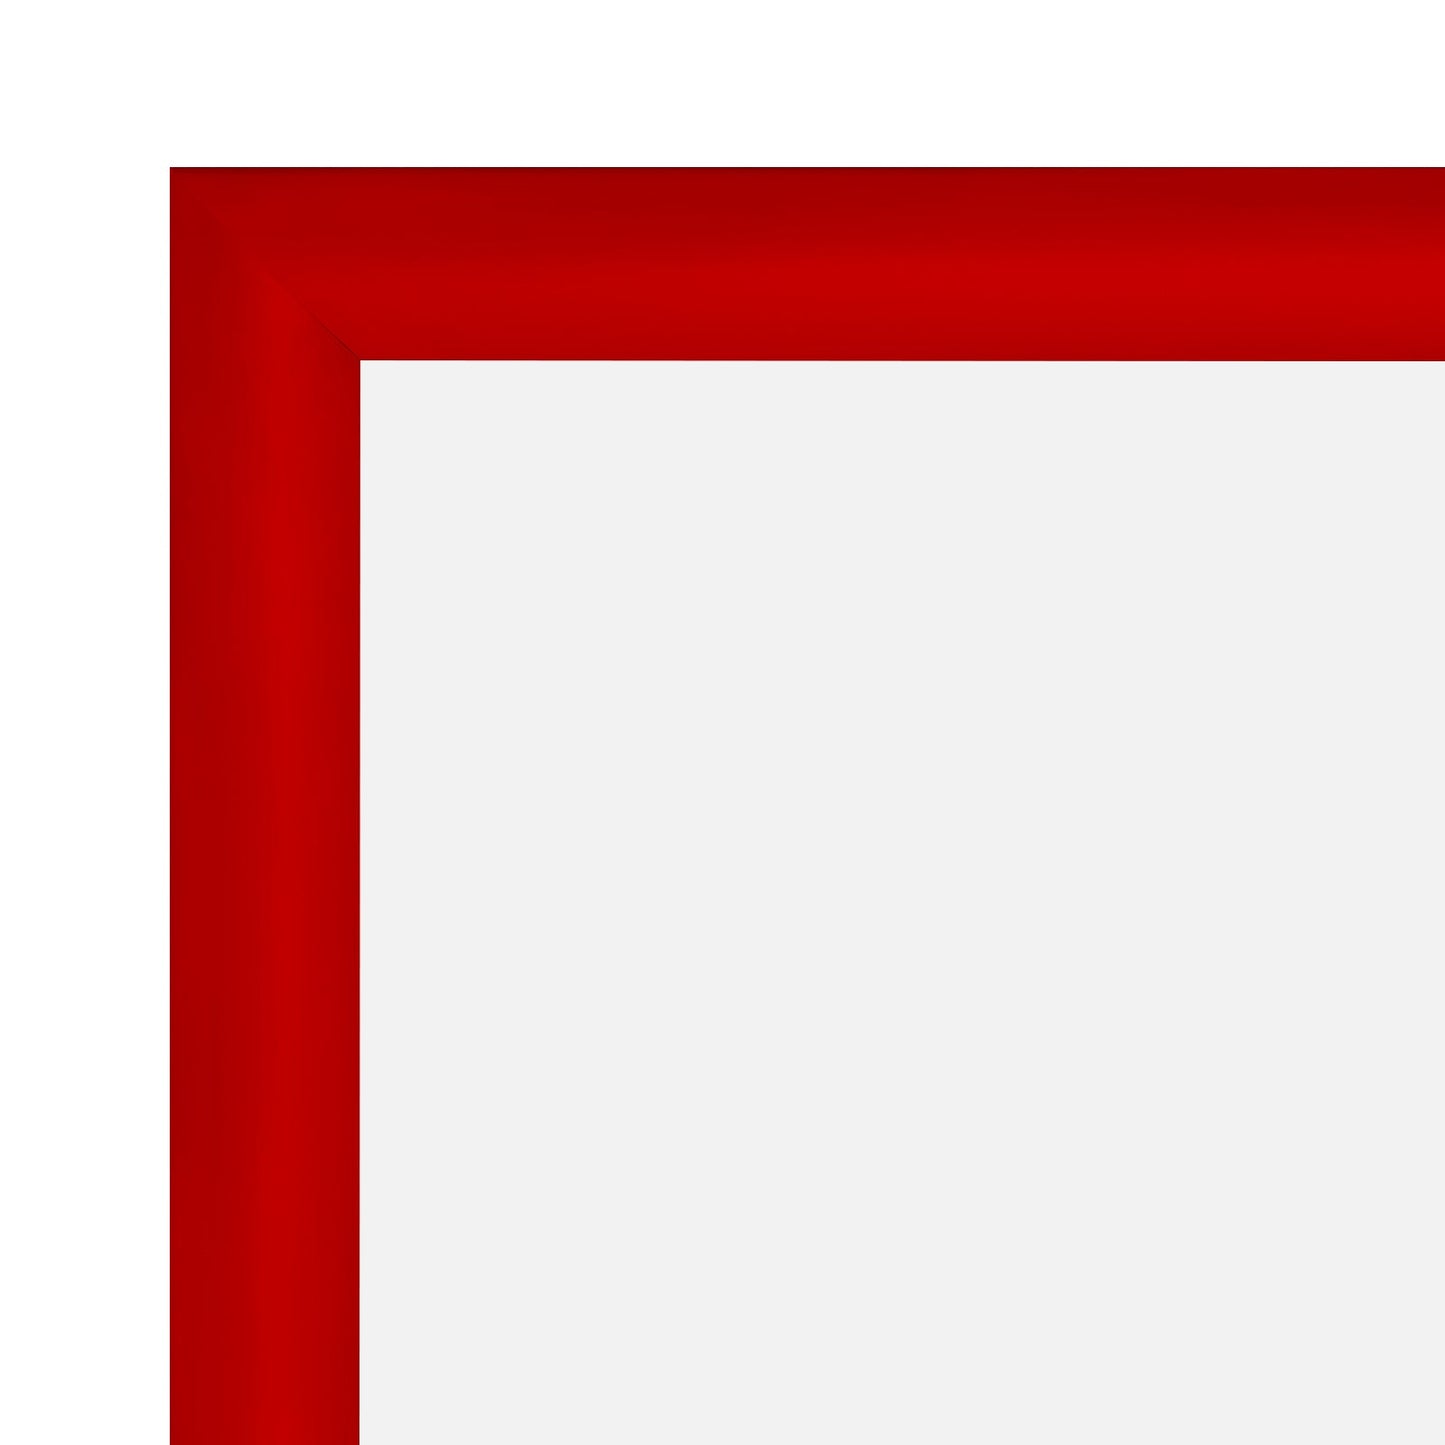 17x23  TRADEframe Red Snap Frame 17x23 - 1.2 inch profile - Snap Frames Direct